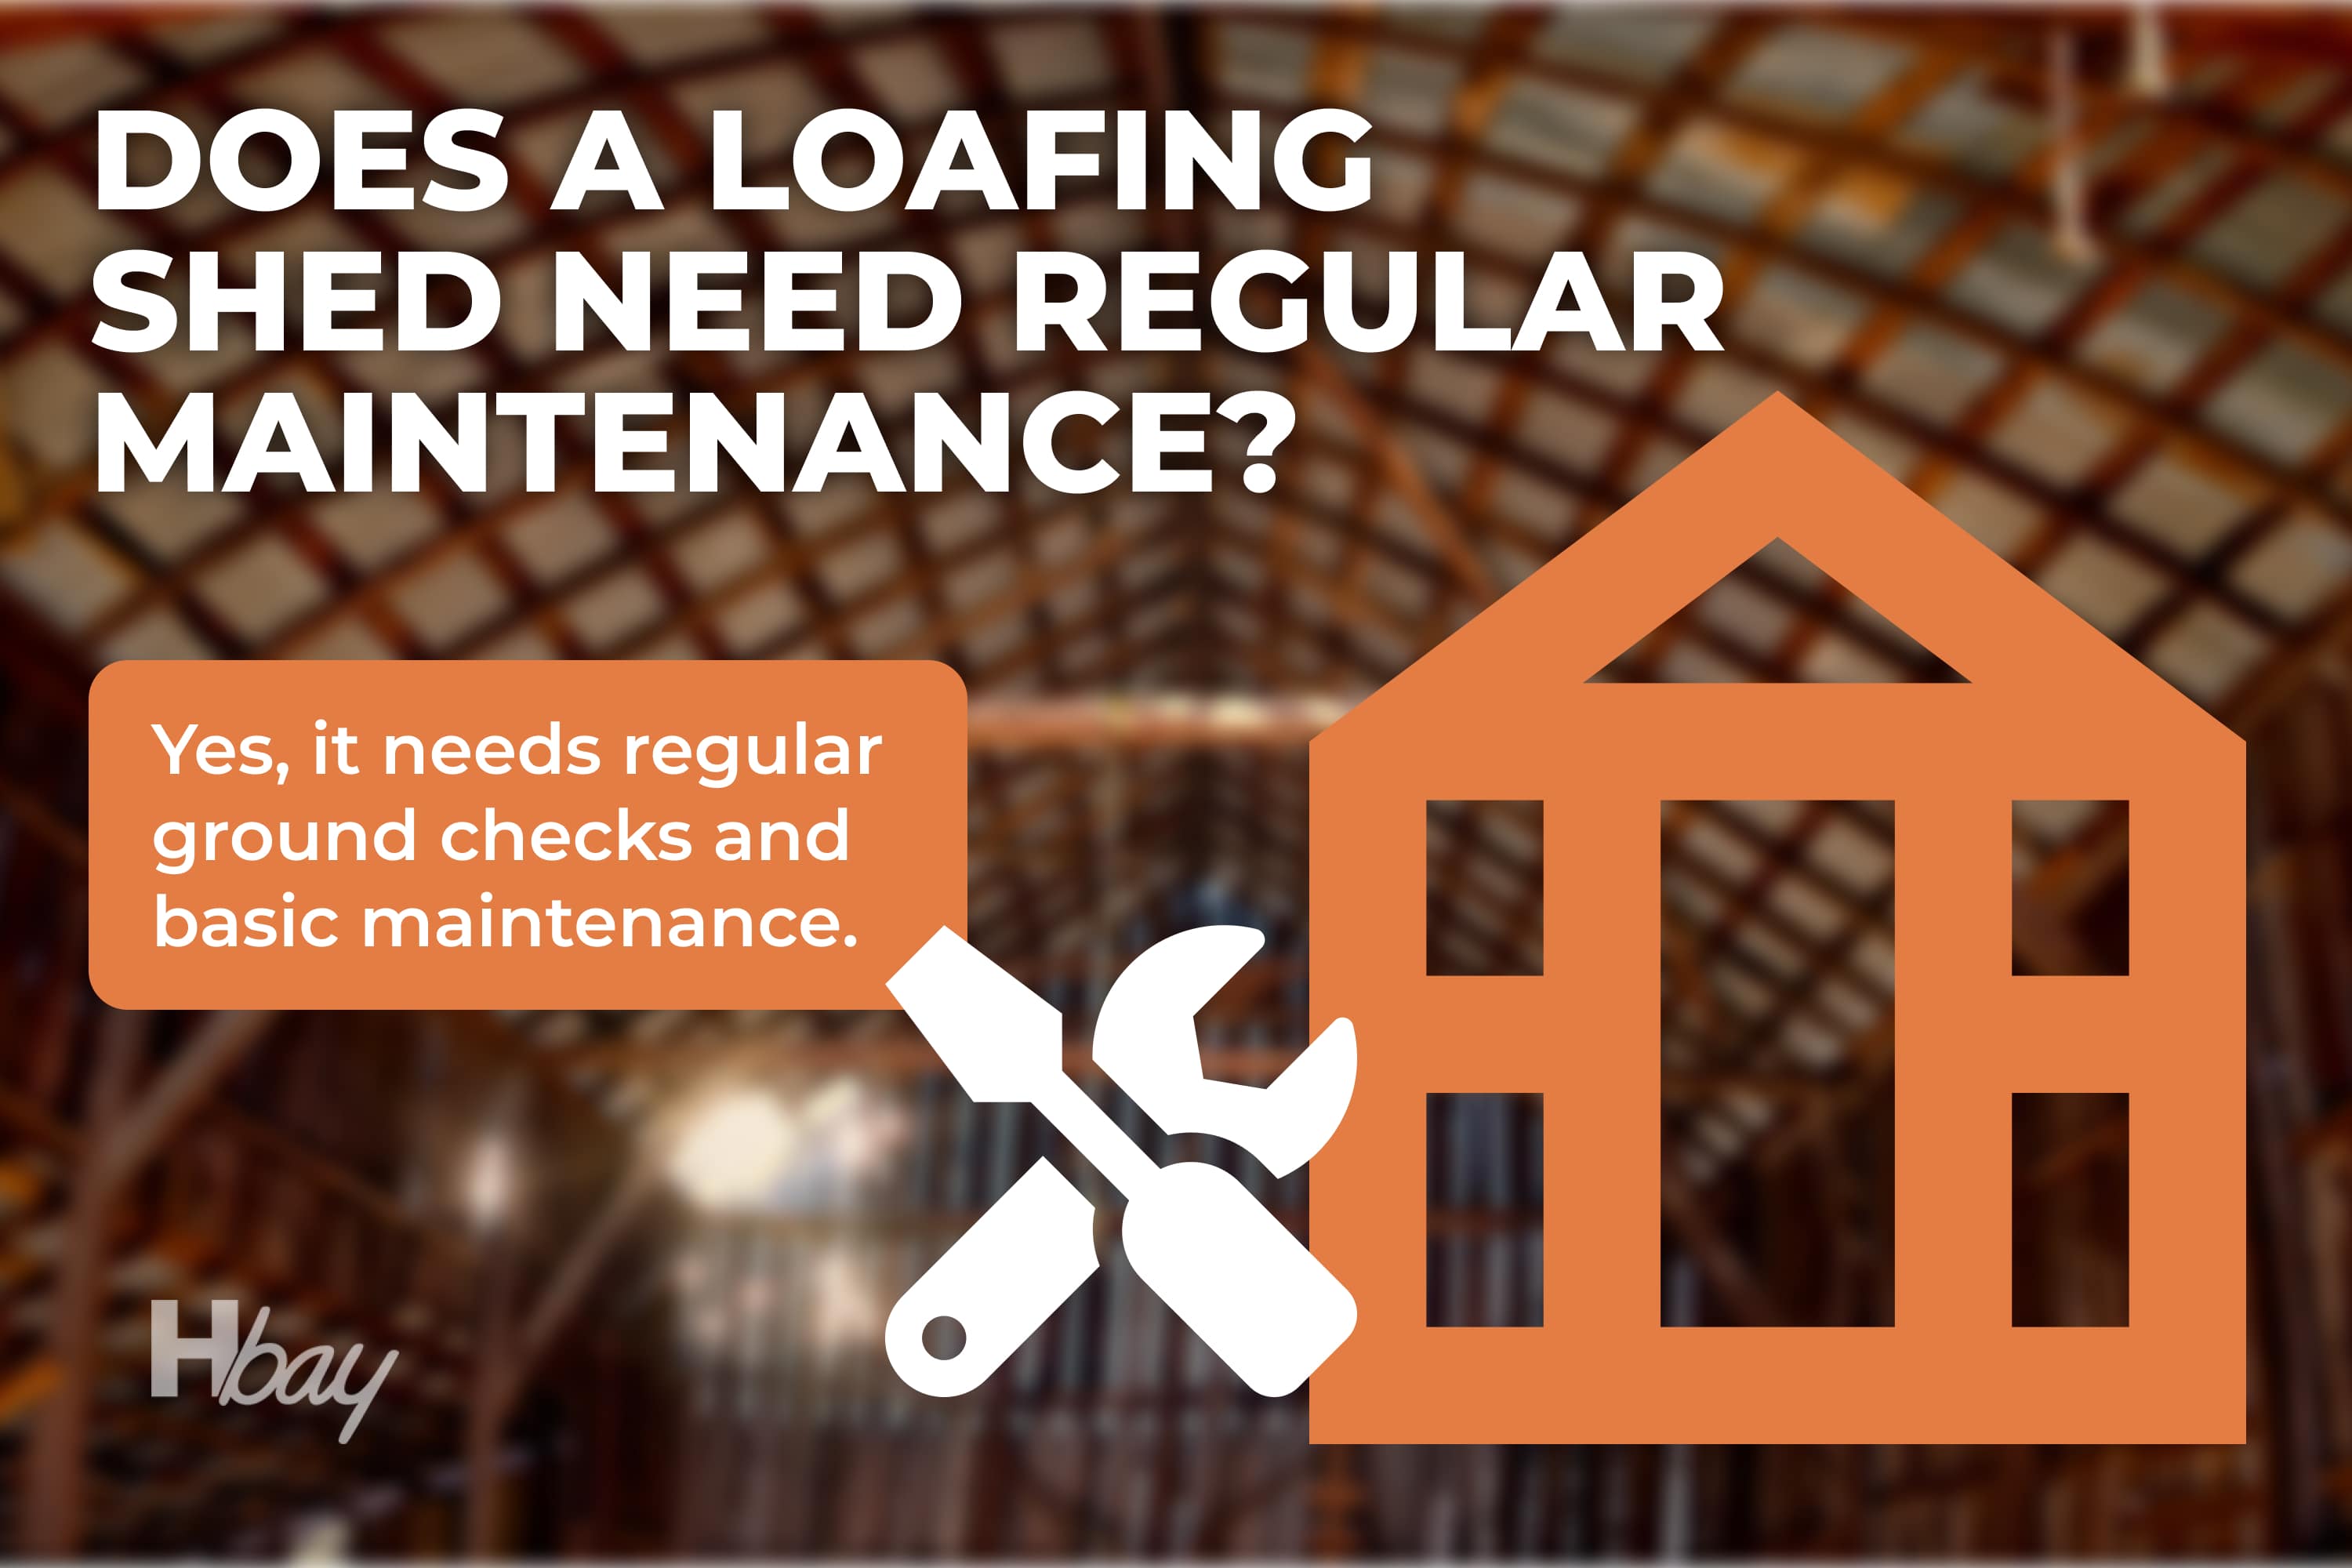 Does a loafing shed need regular maintenance